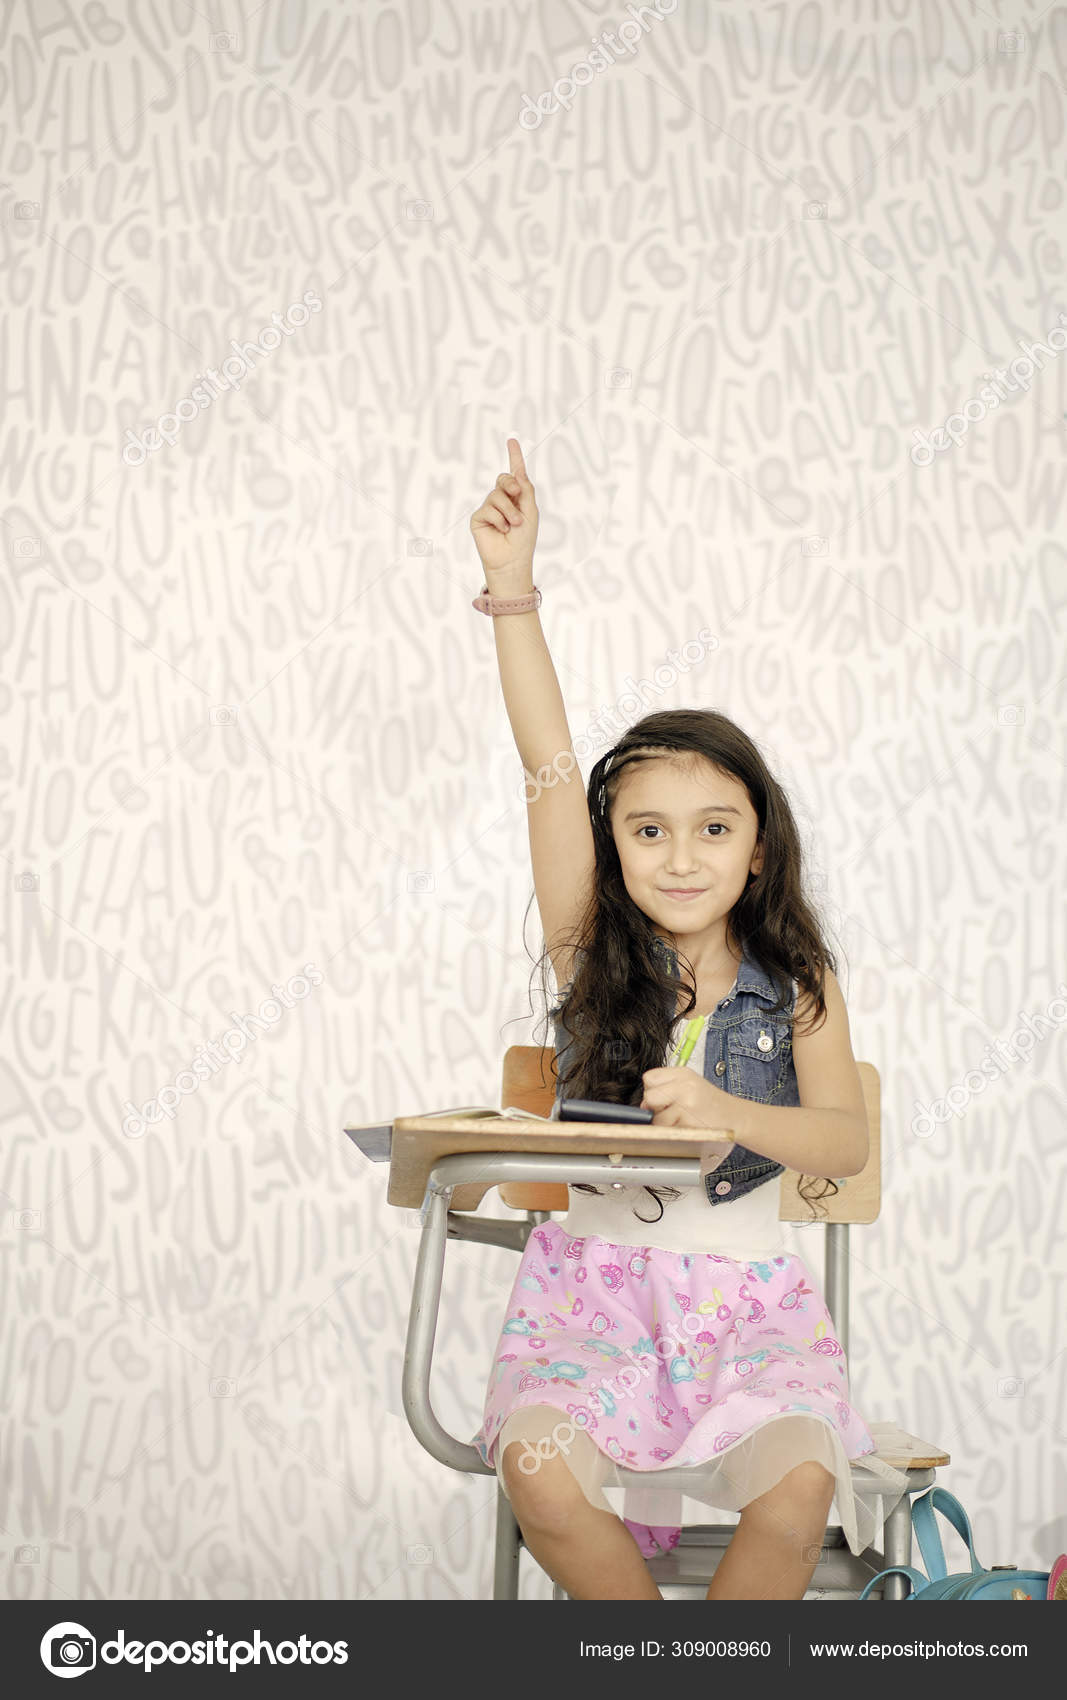 Lonely Girl Sitting At A Desk Raising Her Hand To Participate In